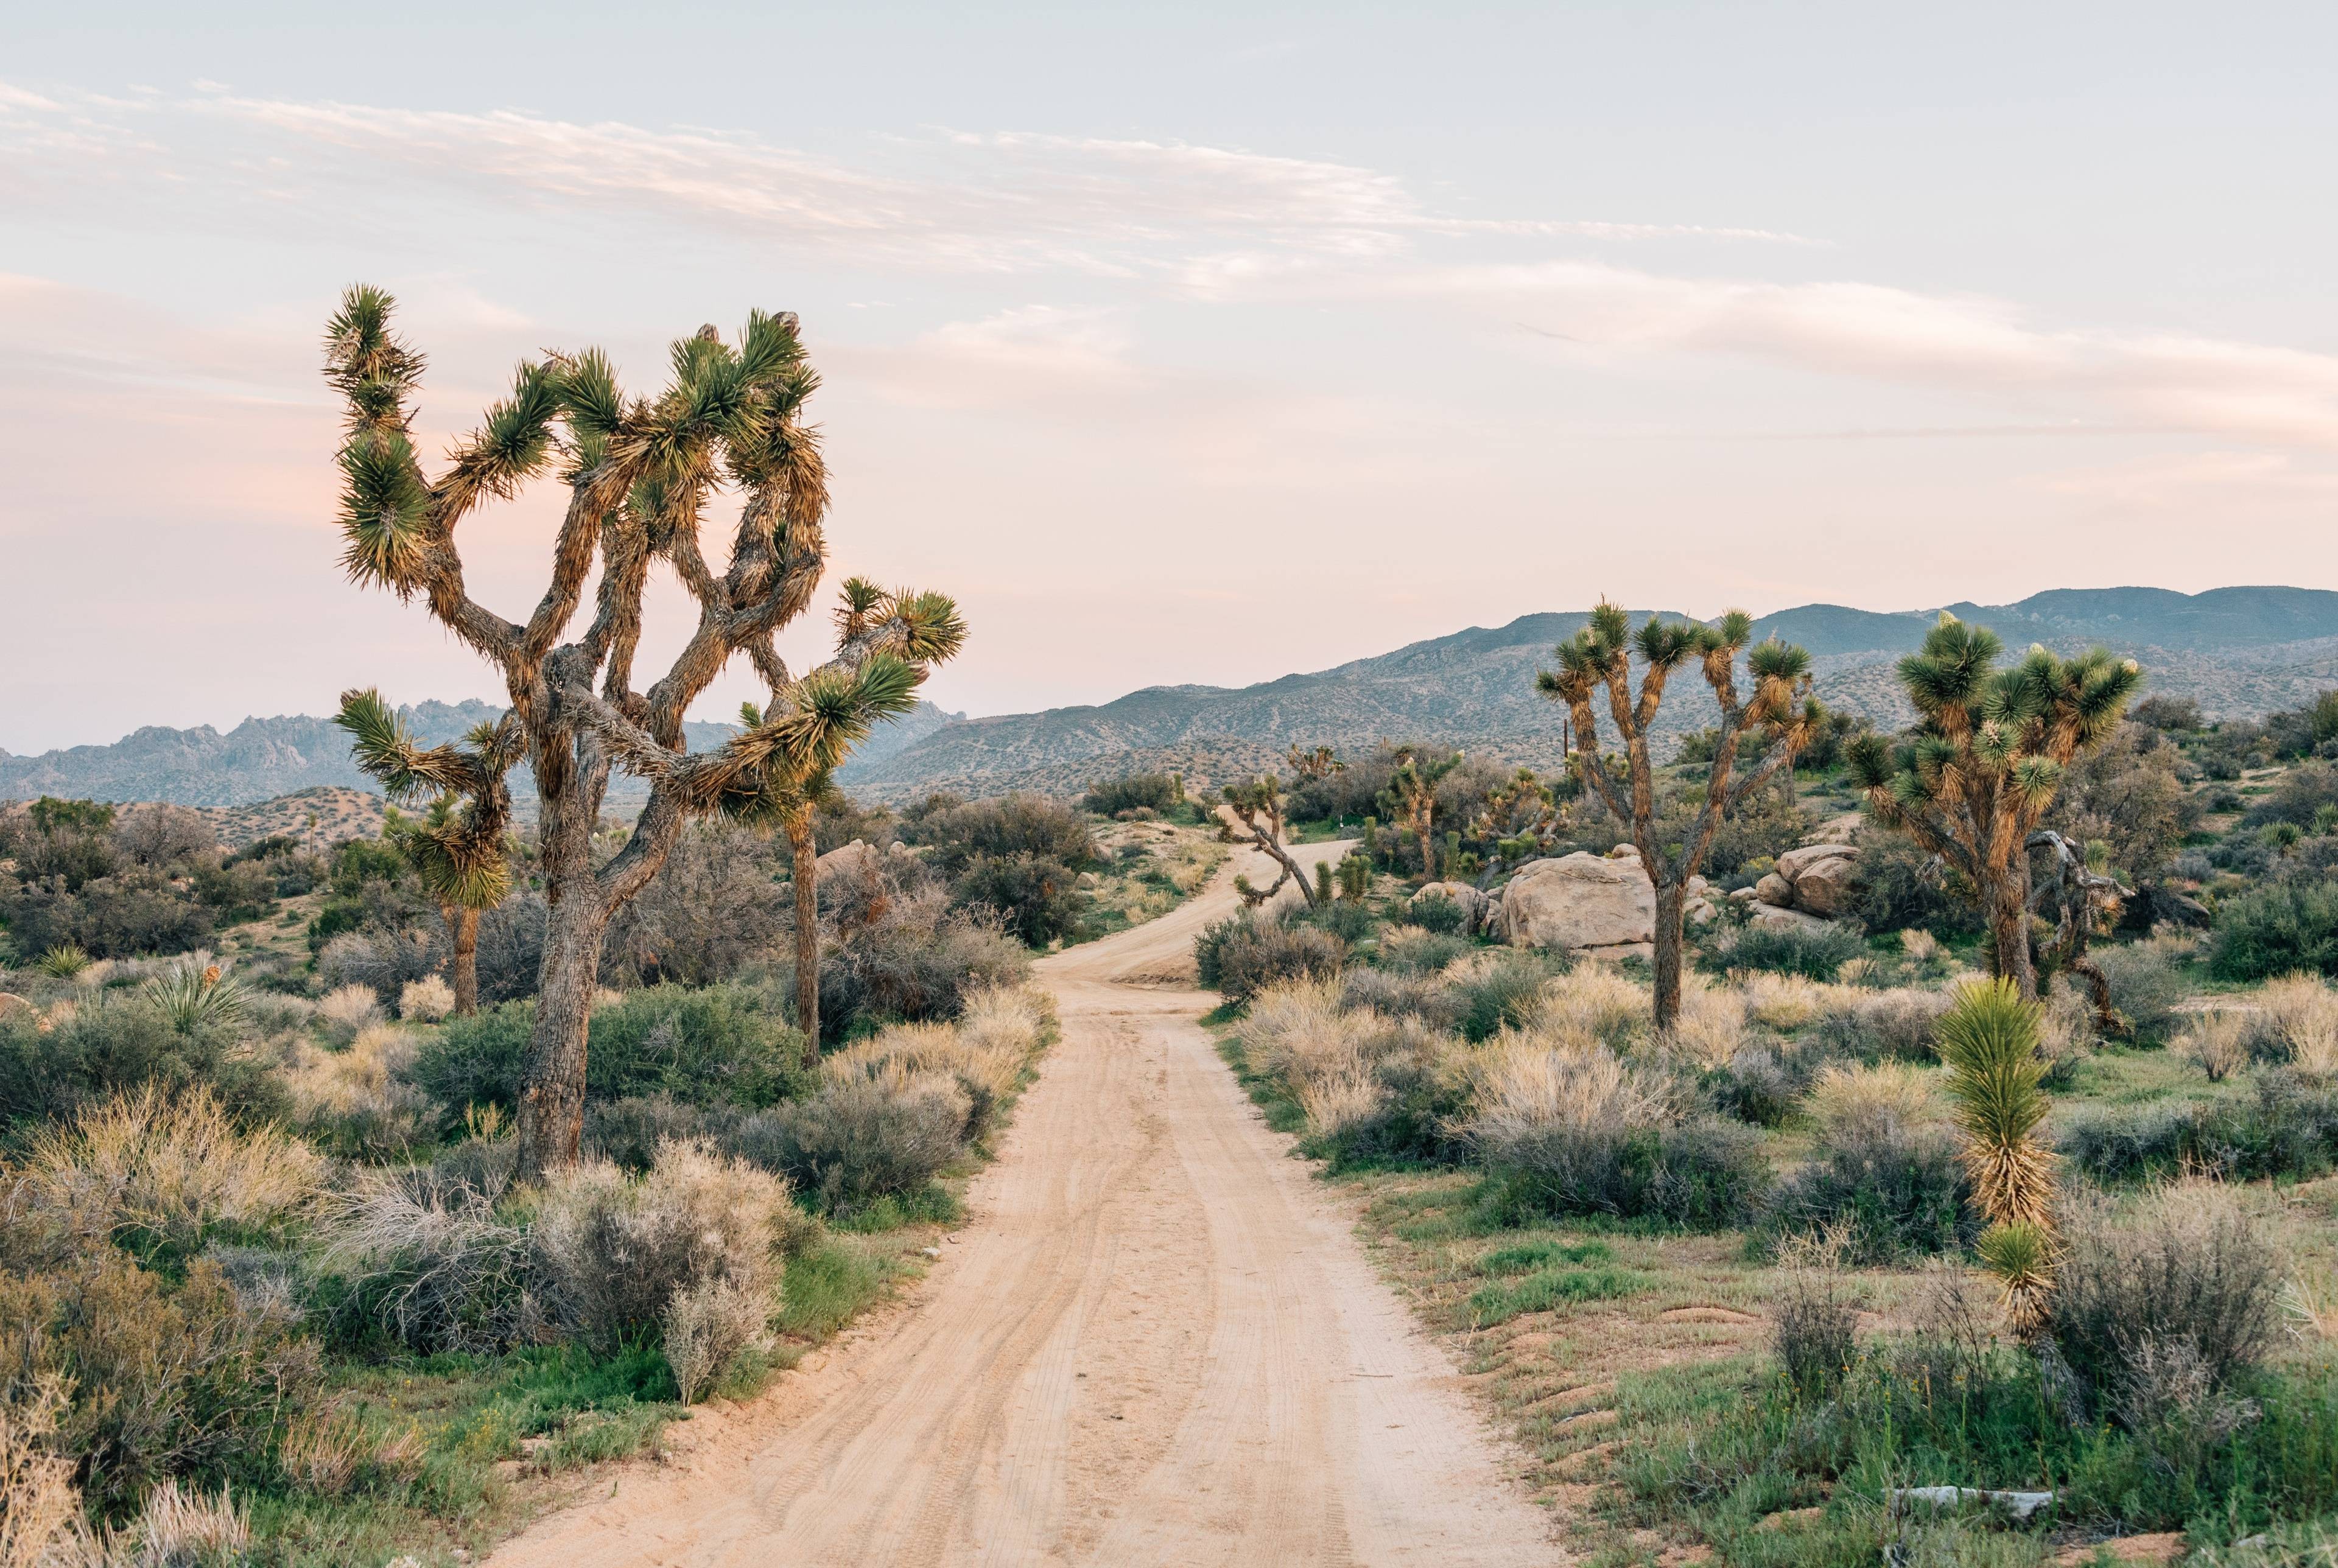 ⚡️ Southern California Road Trip: Deserts, Mountains, and Valleys